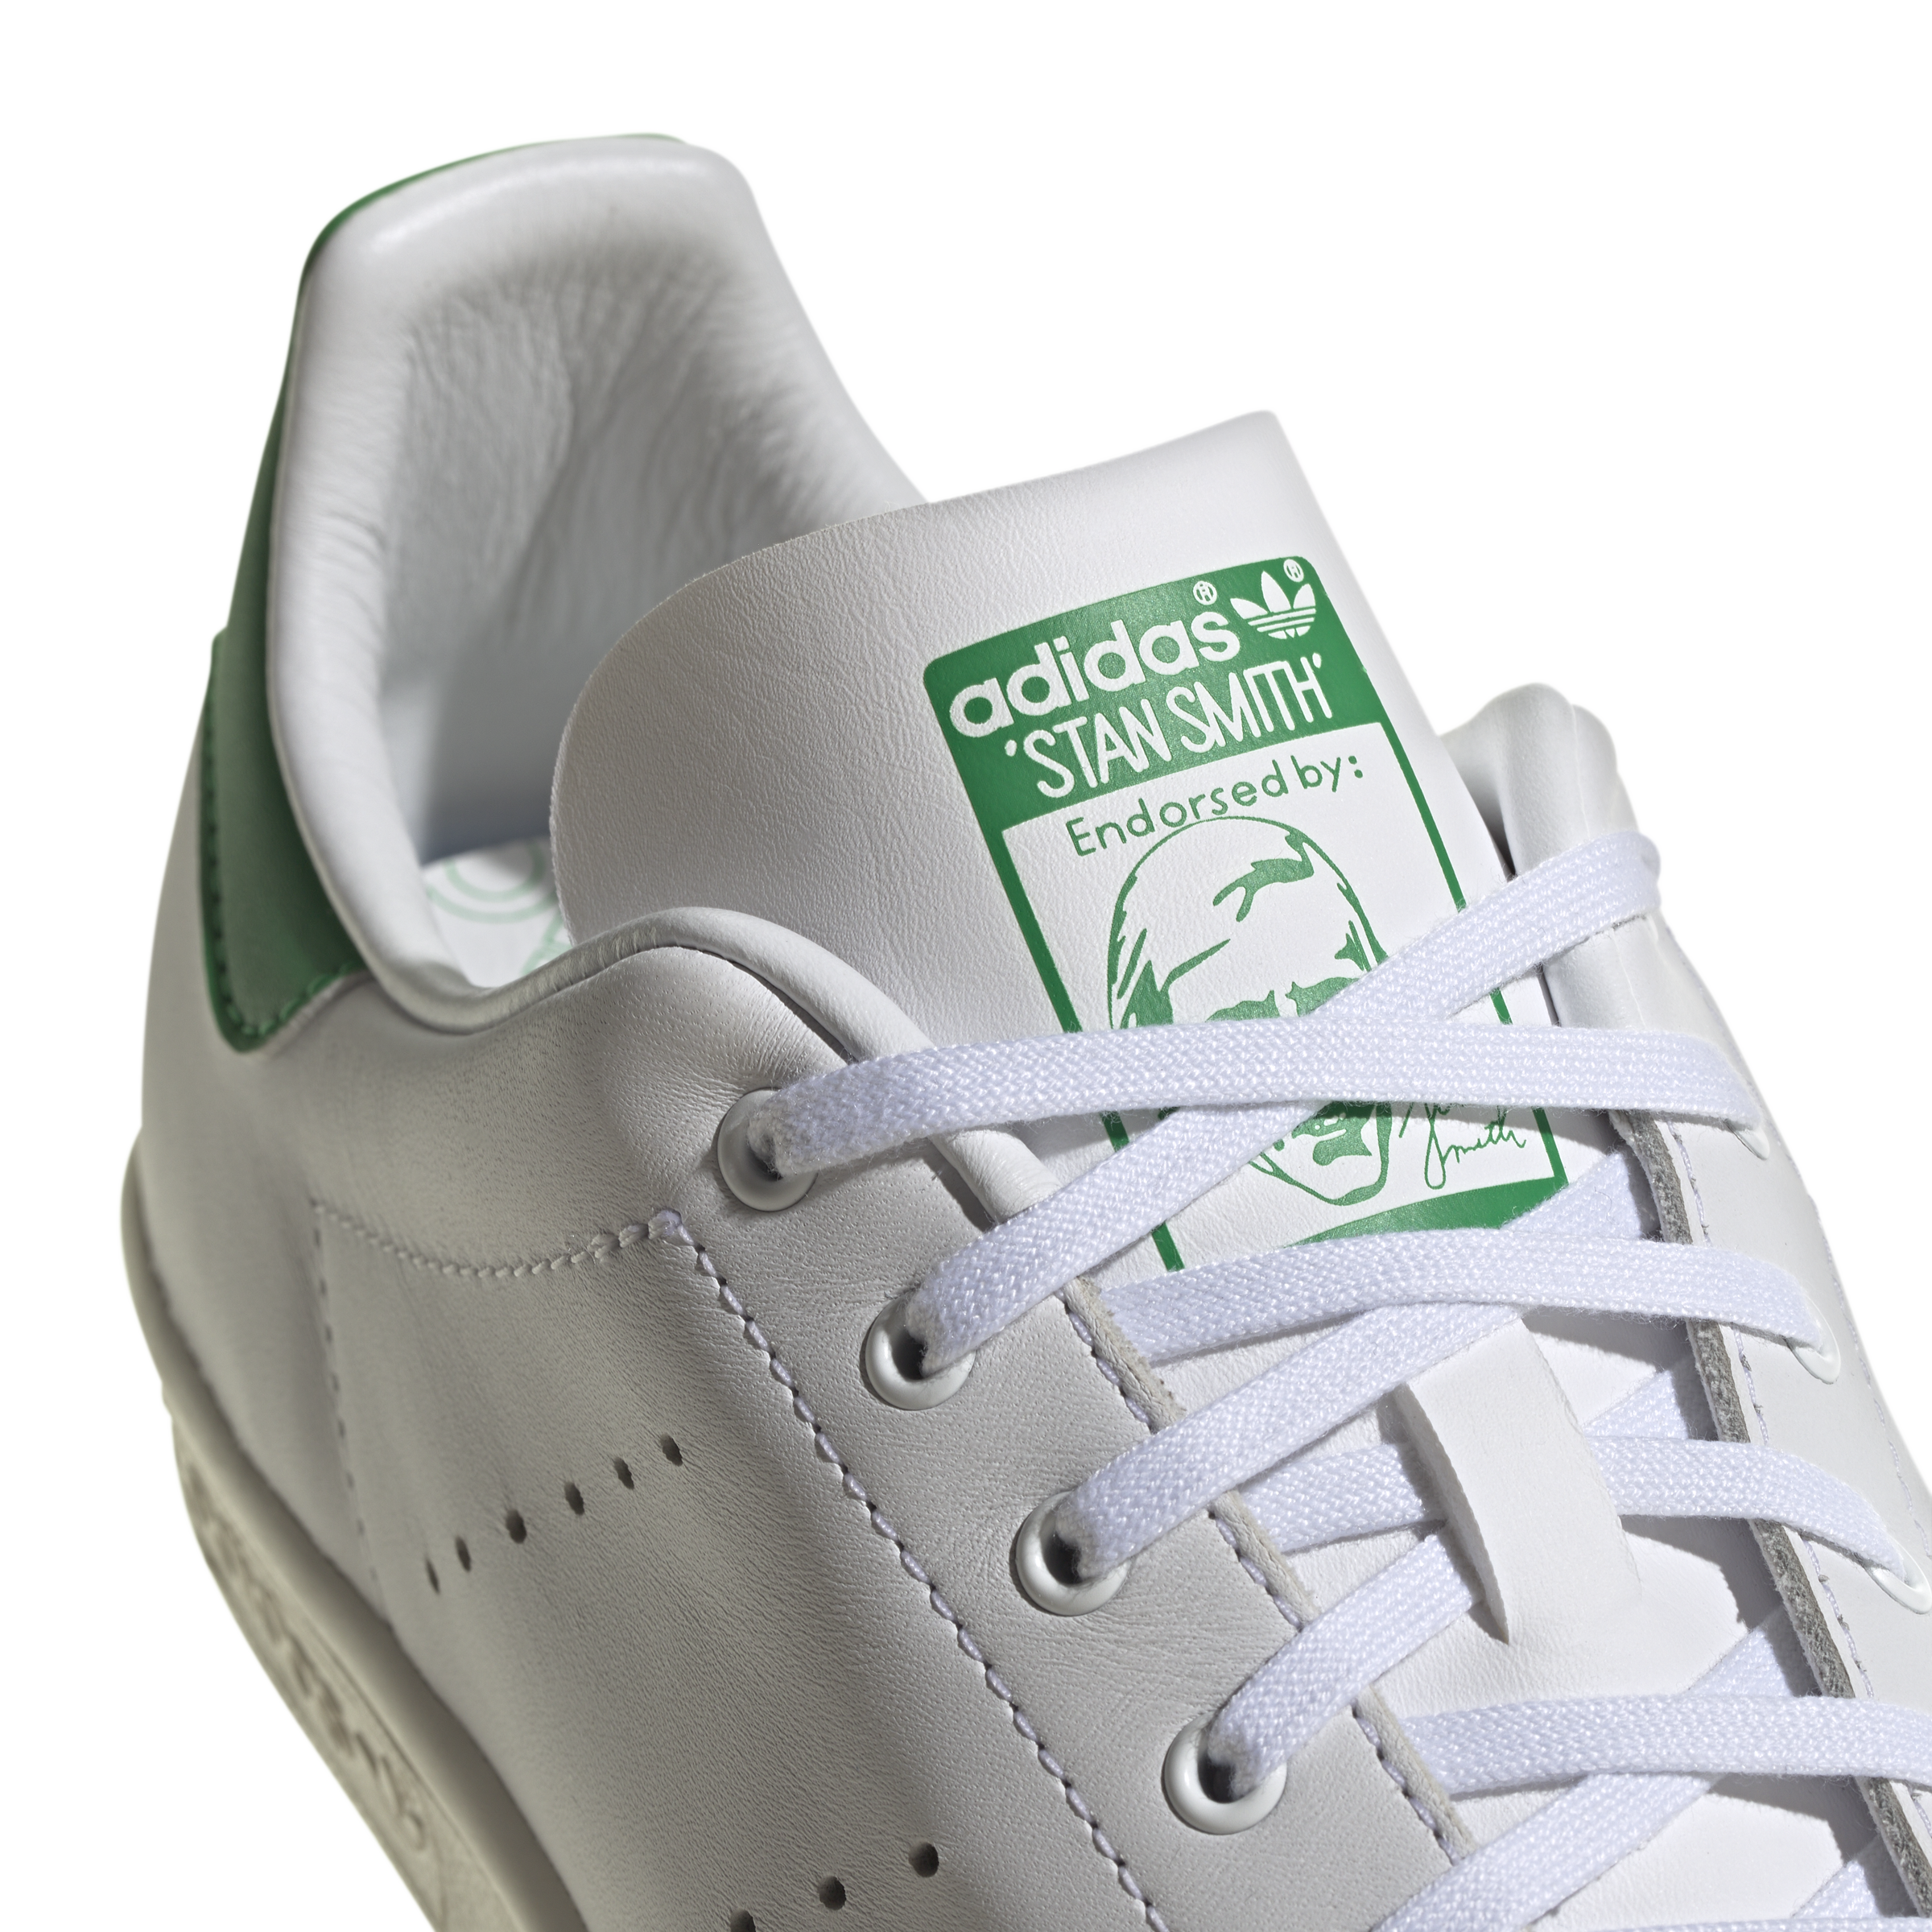 Norse Store | Shipping Worldwide - adidas Originals STAN SMITH 80s